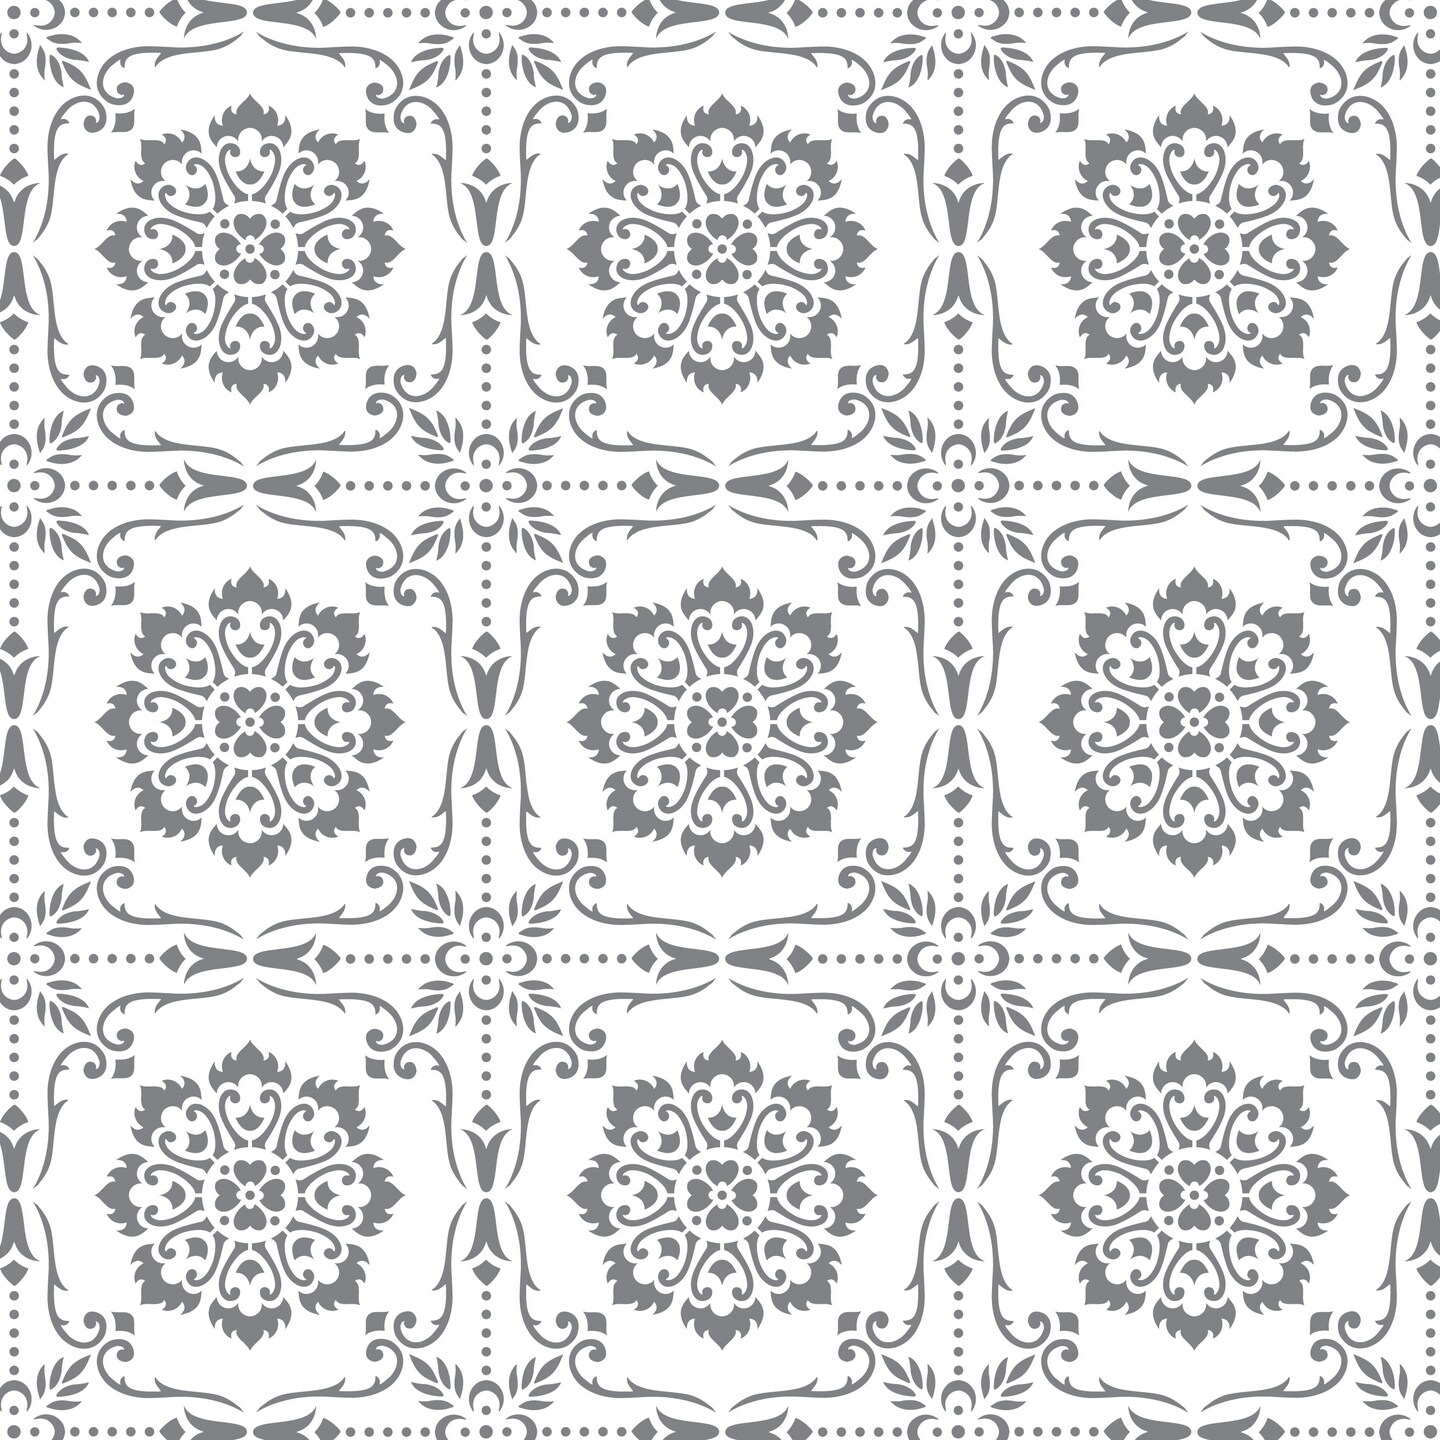 Parisian Tiles All Over Wall Stencil | 3715 by Designer Stencils | Pattern Stencils | Reusable Stencils for Painting | Safe &#x26; Reusable Template for Wall Decor | Try This Stencil Instead of a Wallpaper | Easy to Use &#x26; Clean Art Stencil Pattern